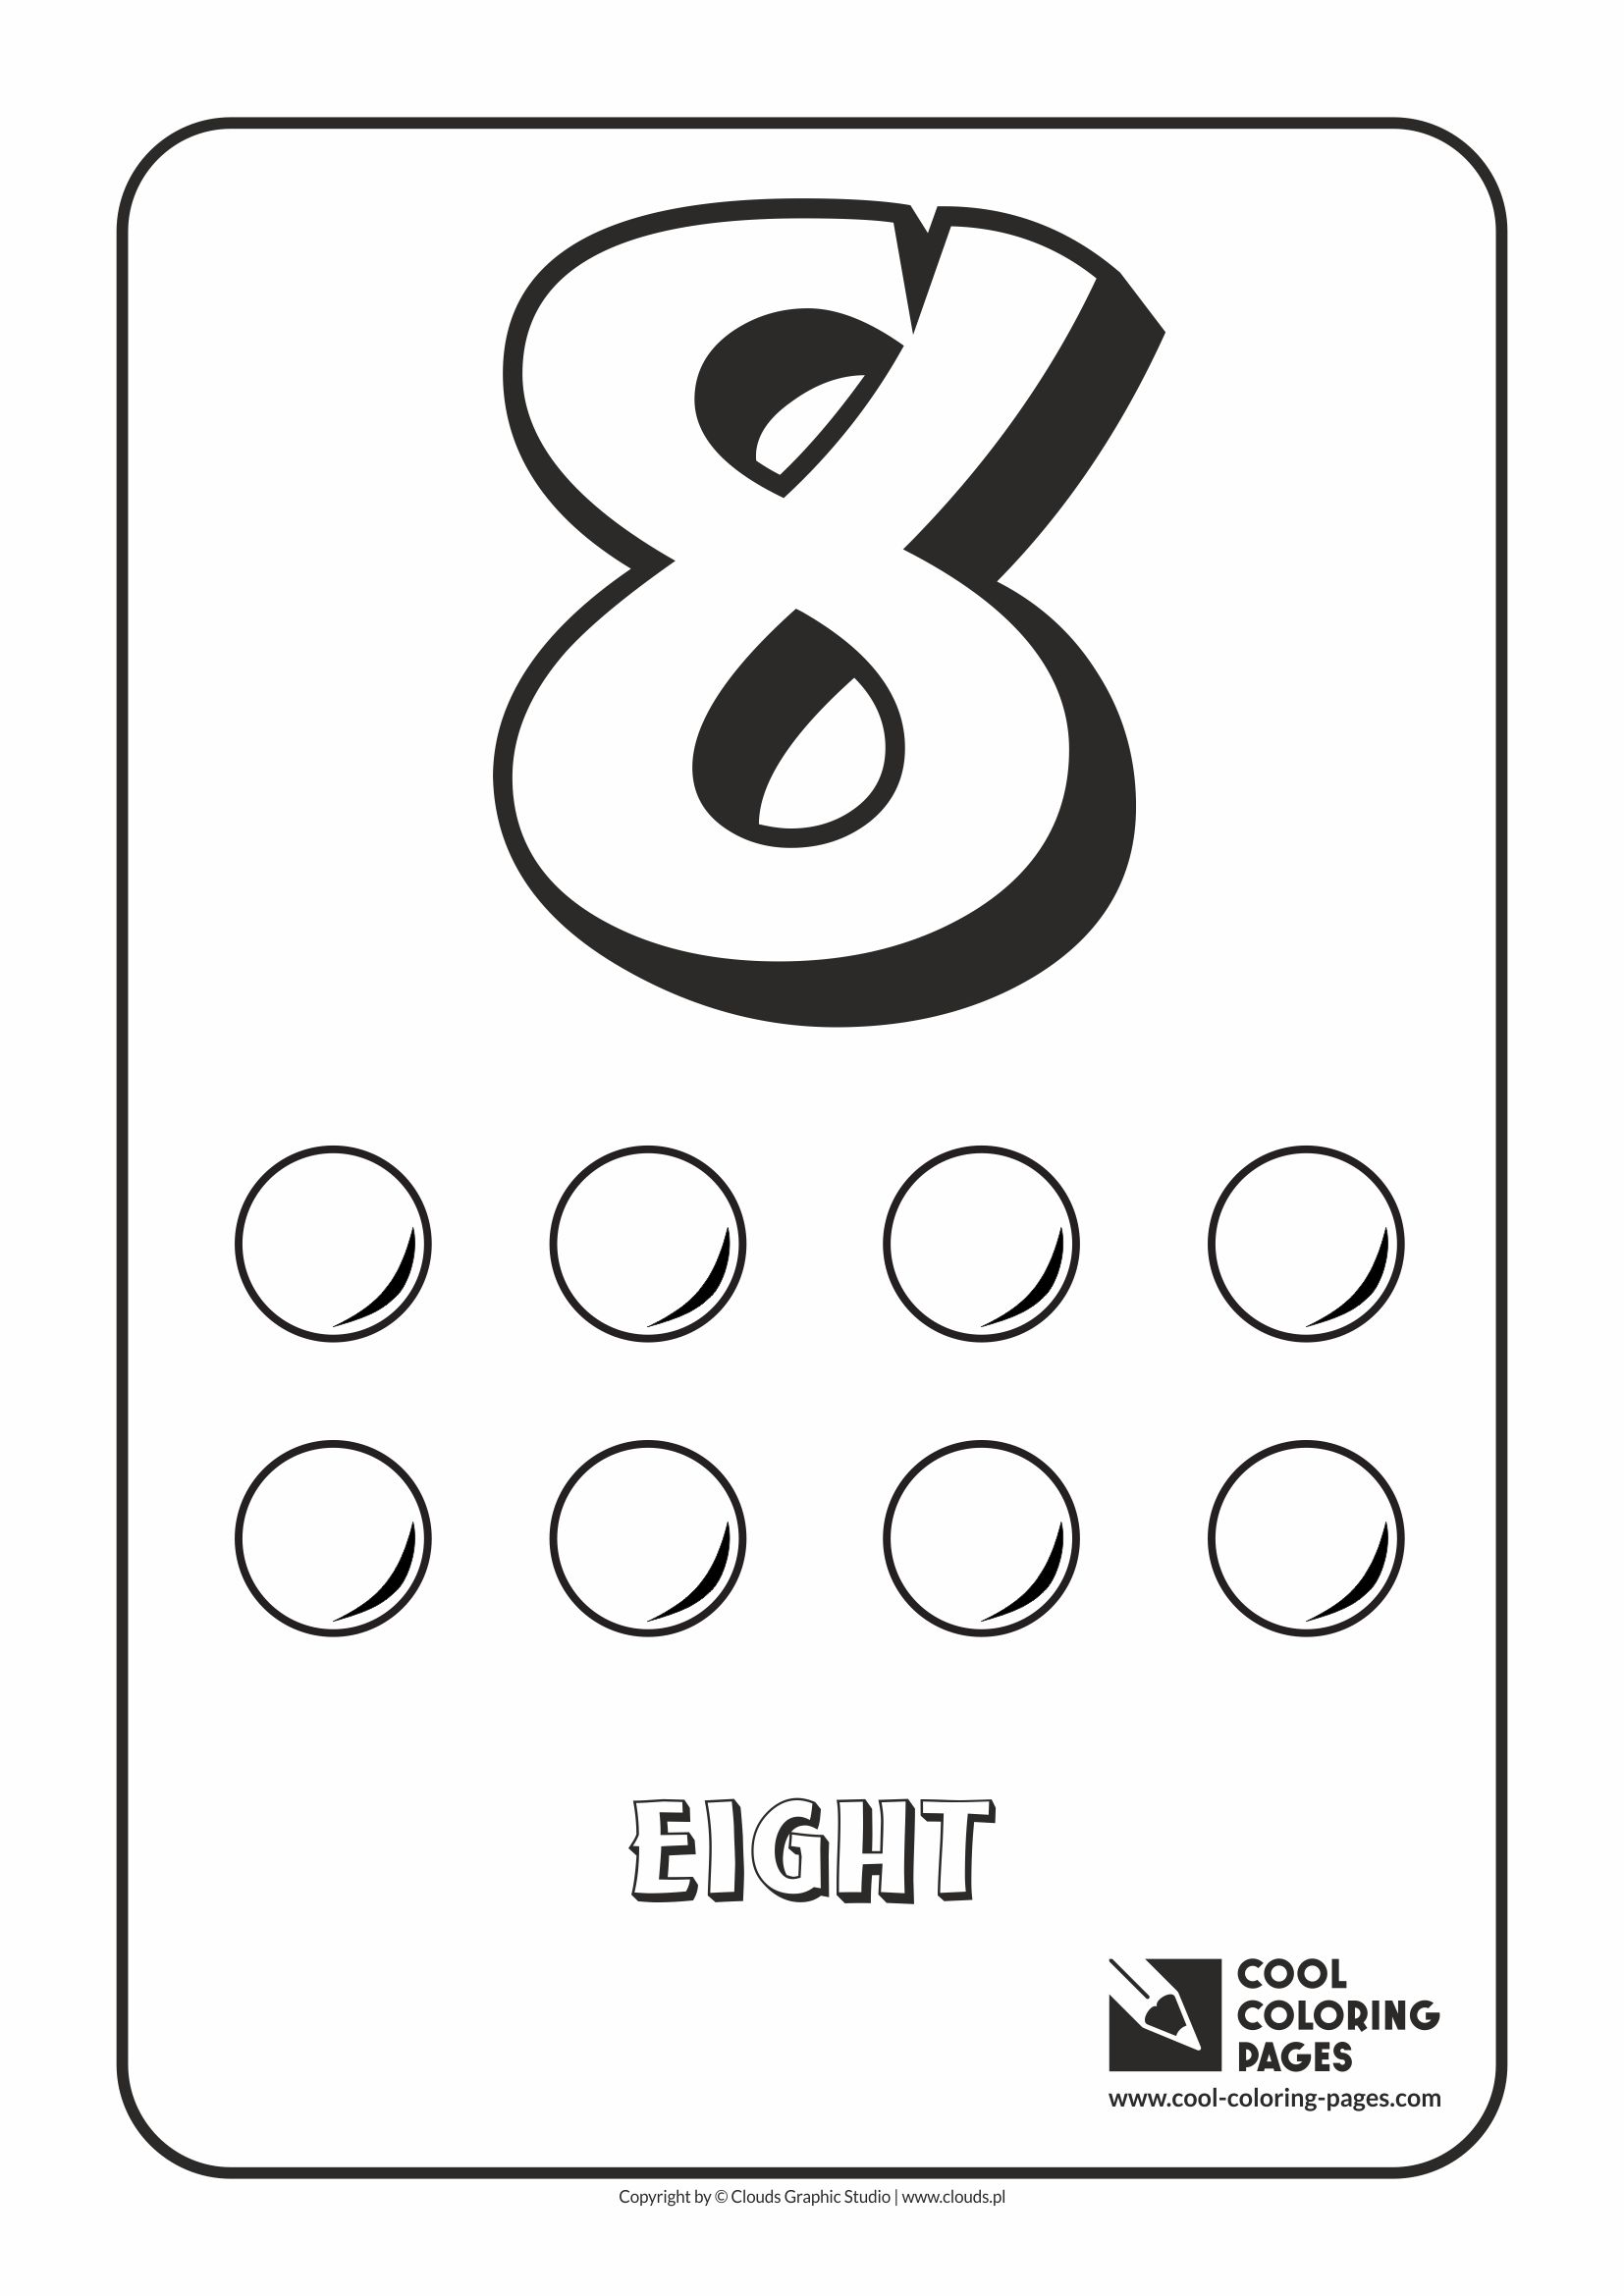 Cool Coloring Pages - Digits / Digit 8 / Coloring page with digit 8